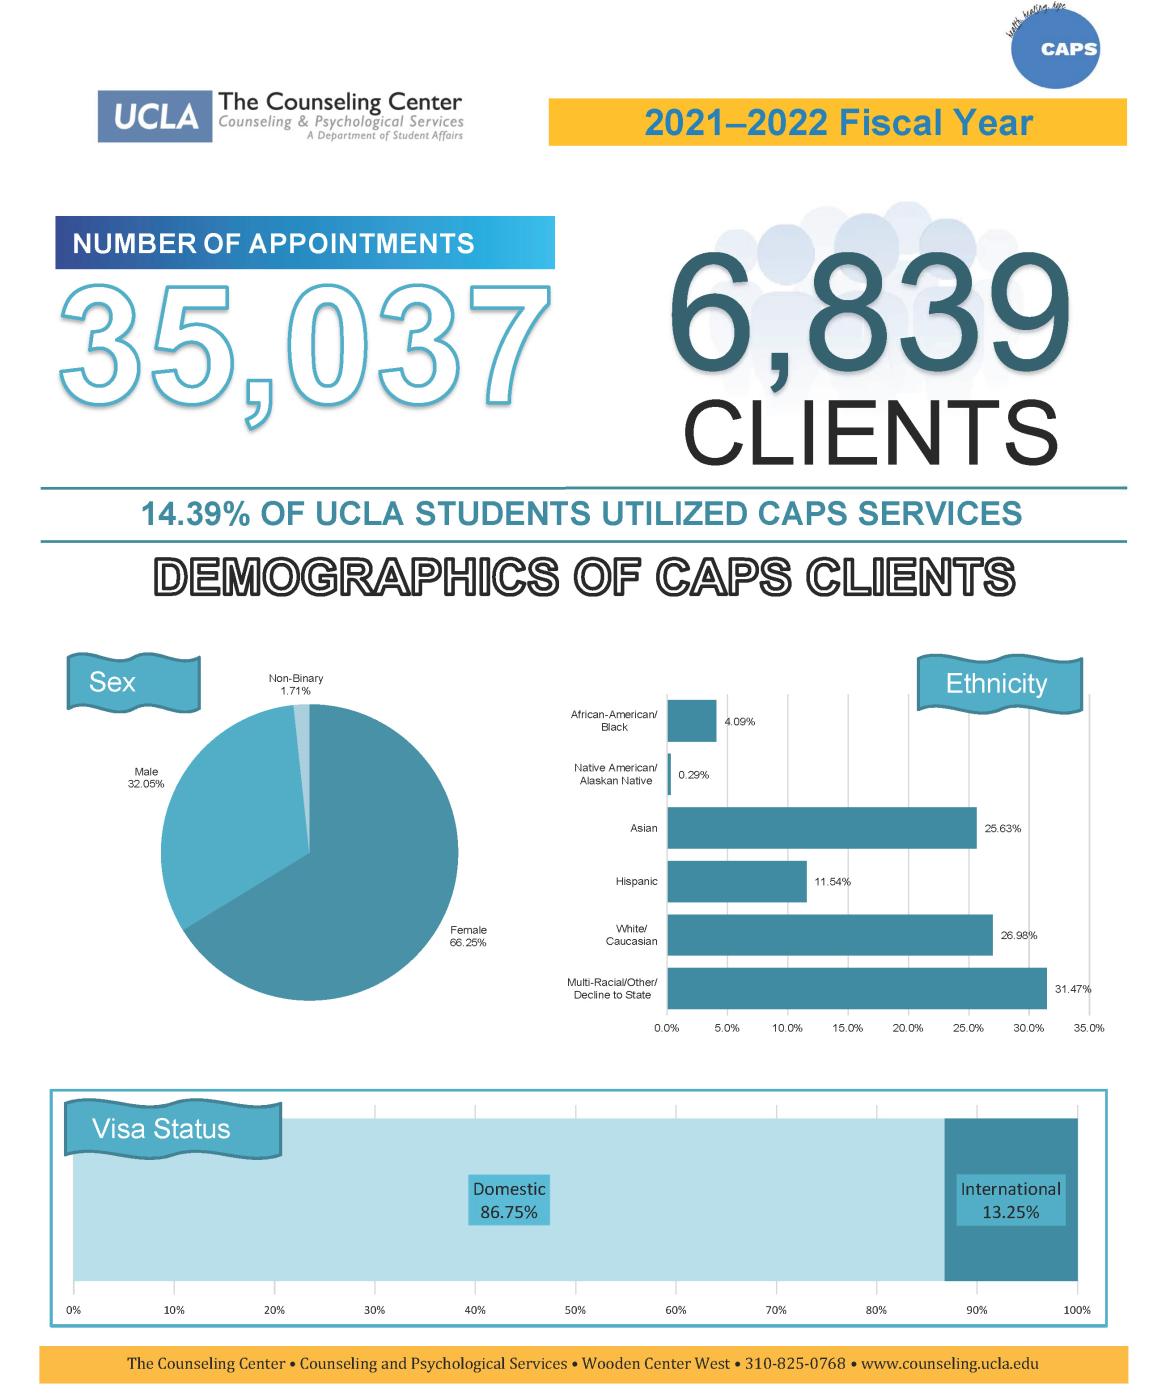 Infographic that shows data for the 2021-2022 fiscal year. 35,037 appointments, 6,839 clients were seen last year. 14.39% of students utilized caps services. 66.25% of students seen were female, 32.05% male, and 1.71% non-binary. In terms of ethnicity, 4.09% were African-American/Black, .29% were Native American/Alaskan Native, 25.63% were Asian, 11.54% were Hispanic, 26.98% were White/Caucasian, and 31.47% were Multi-Racial/other/declined to state. 86.75% had a domestic visa status, 13.25% international